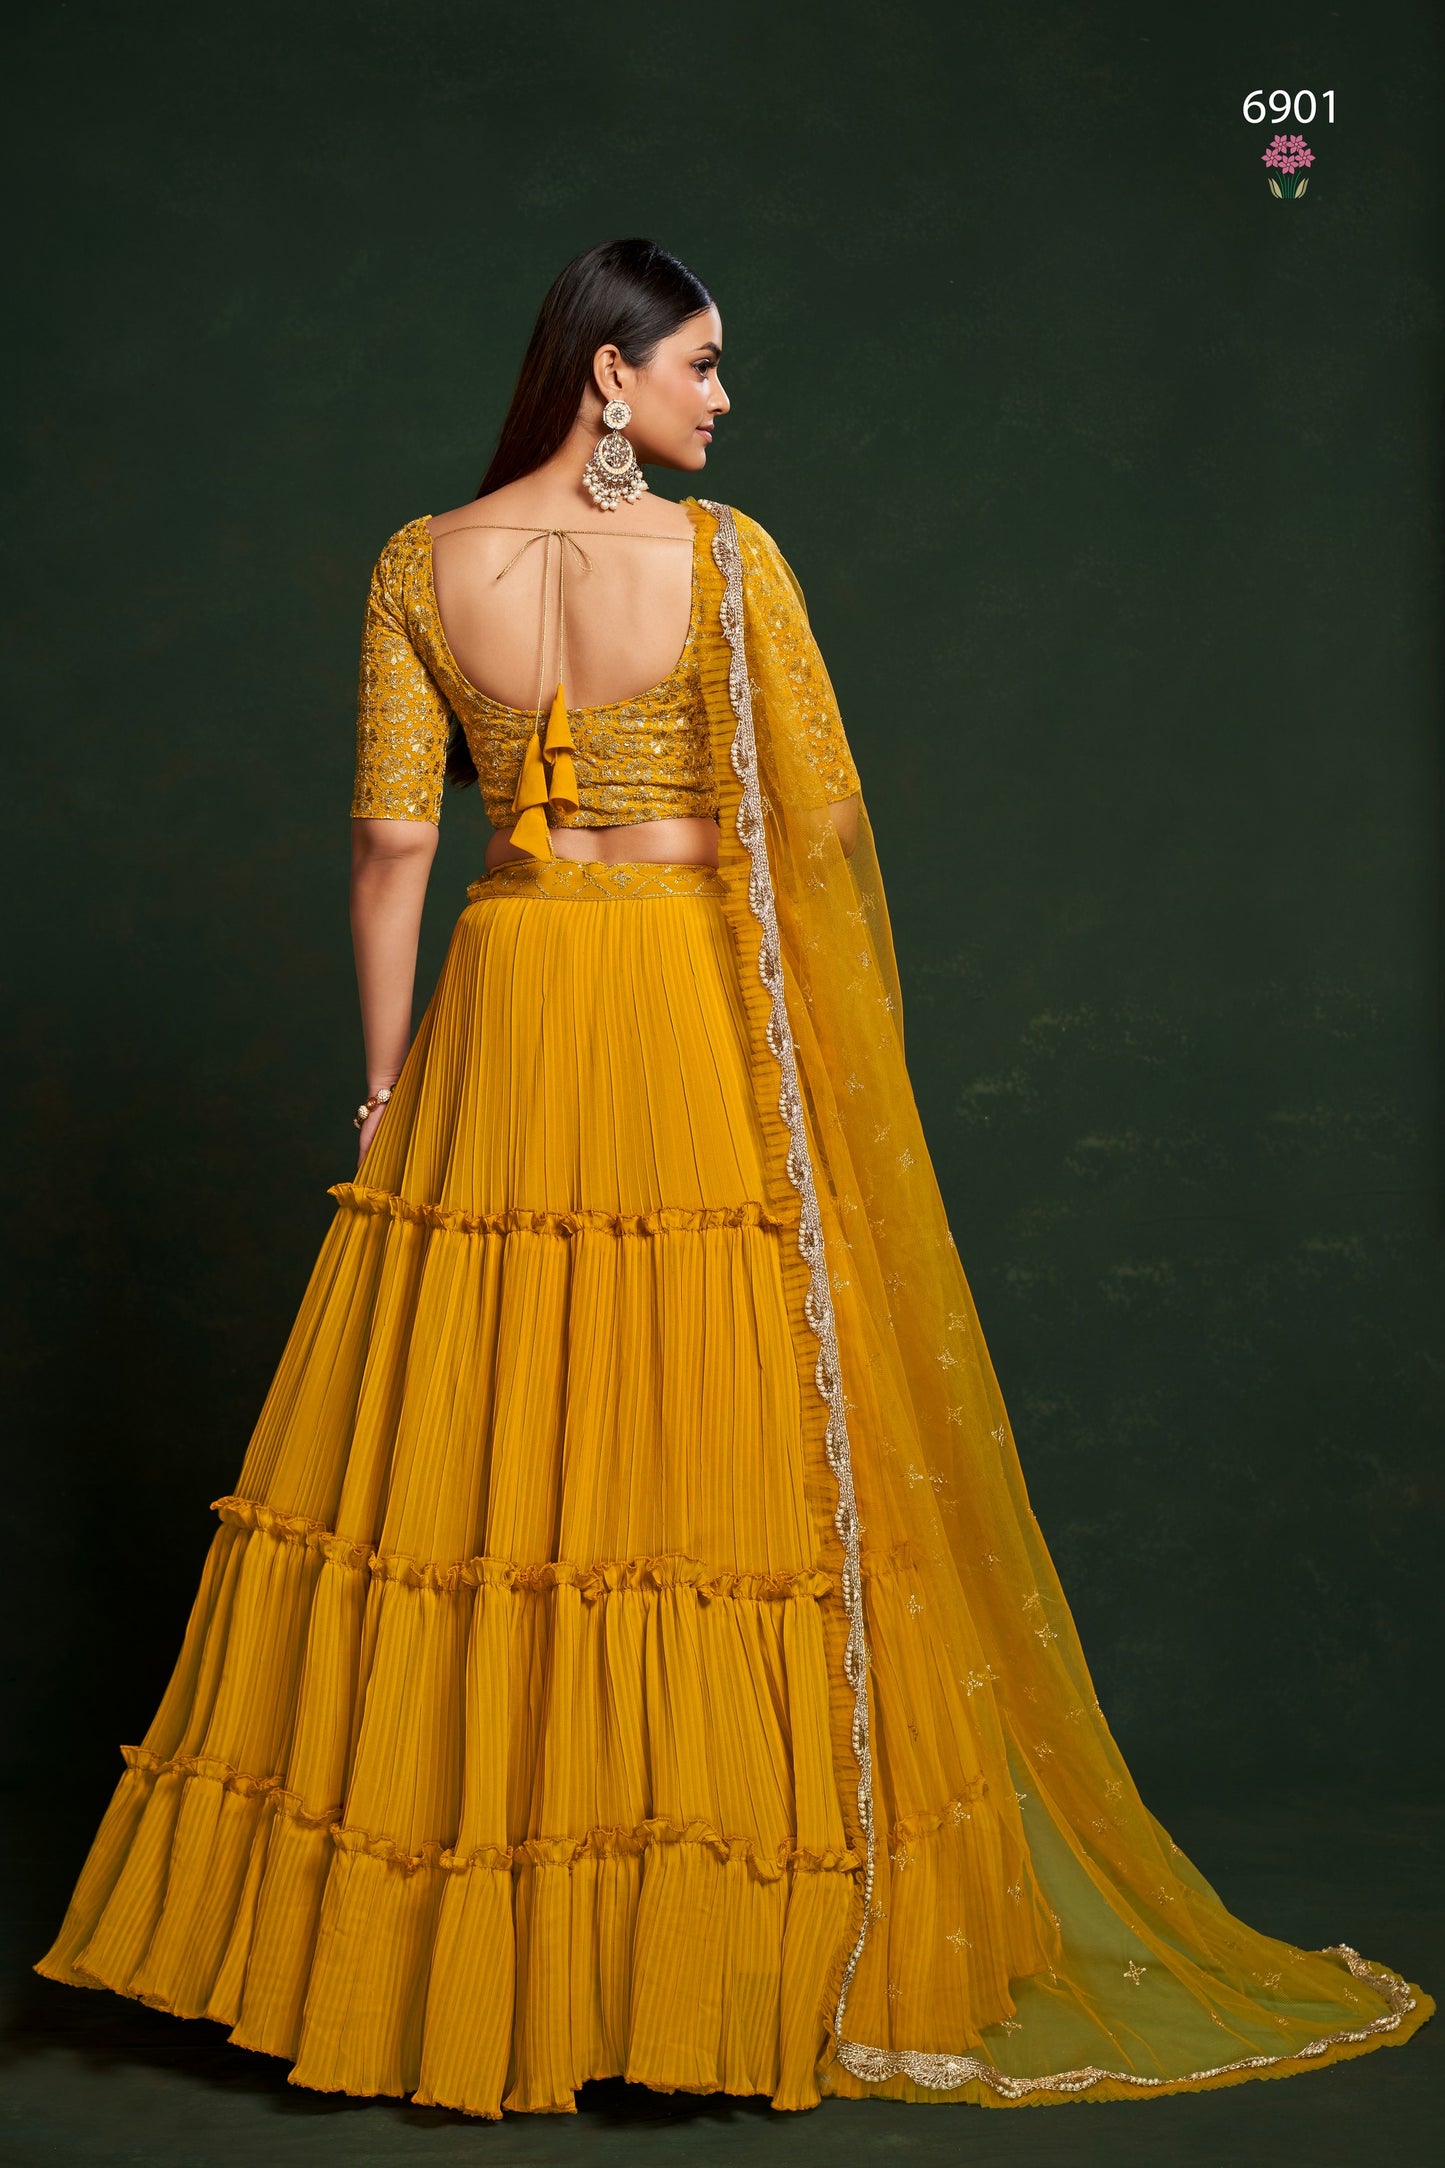 Yellow Georgette Ruffle Lehenga Choli 18 Meter Flair For Indian Festivals & Weddings - Sequence Embroidery Work, Thread Embroidery Work,